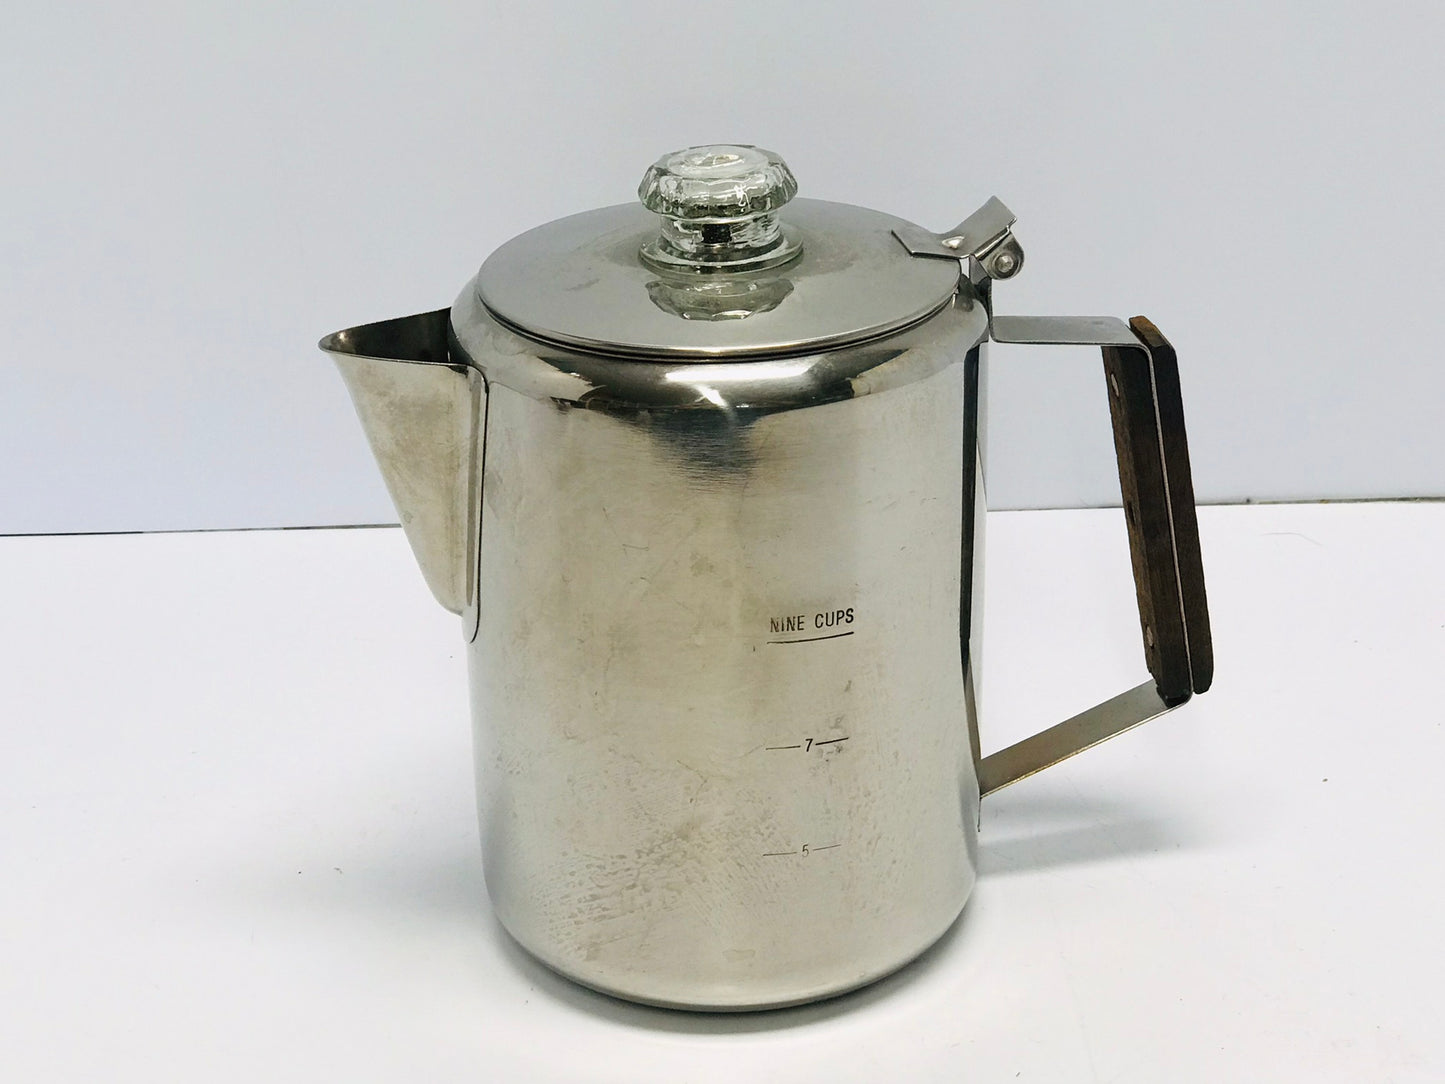 Camping Coffee Pot Perolator 9 cup Stainless Steel Rustproof Fast Heat Up Outdoor Use Excellent As New